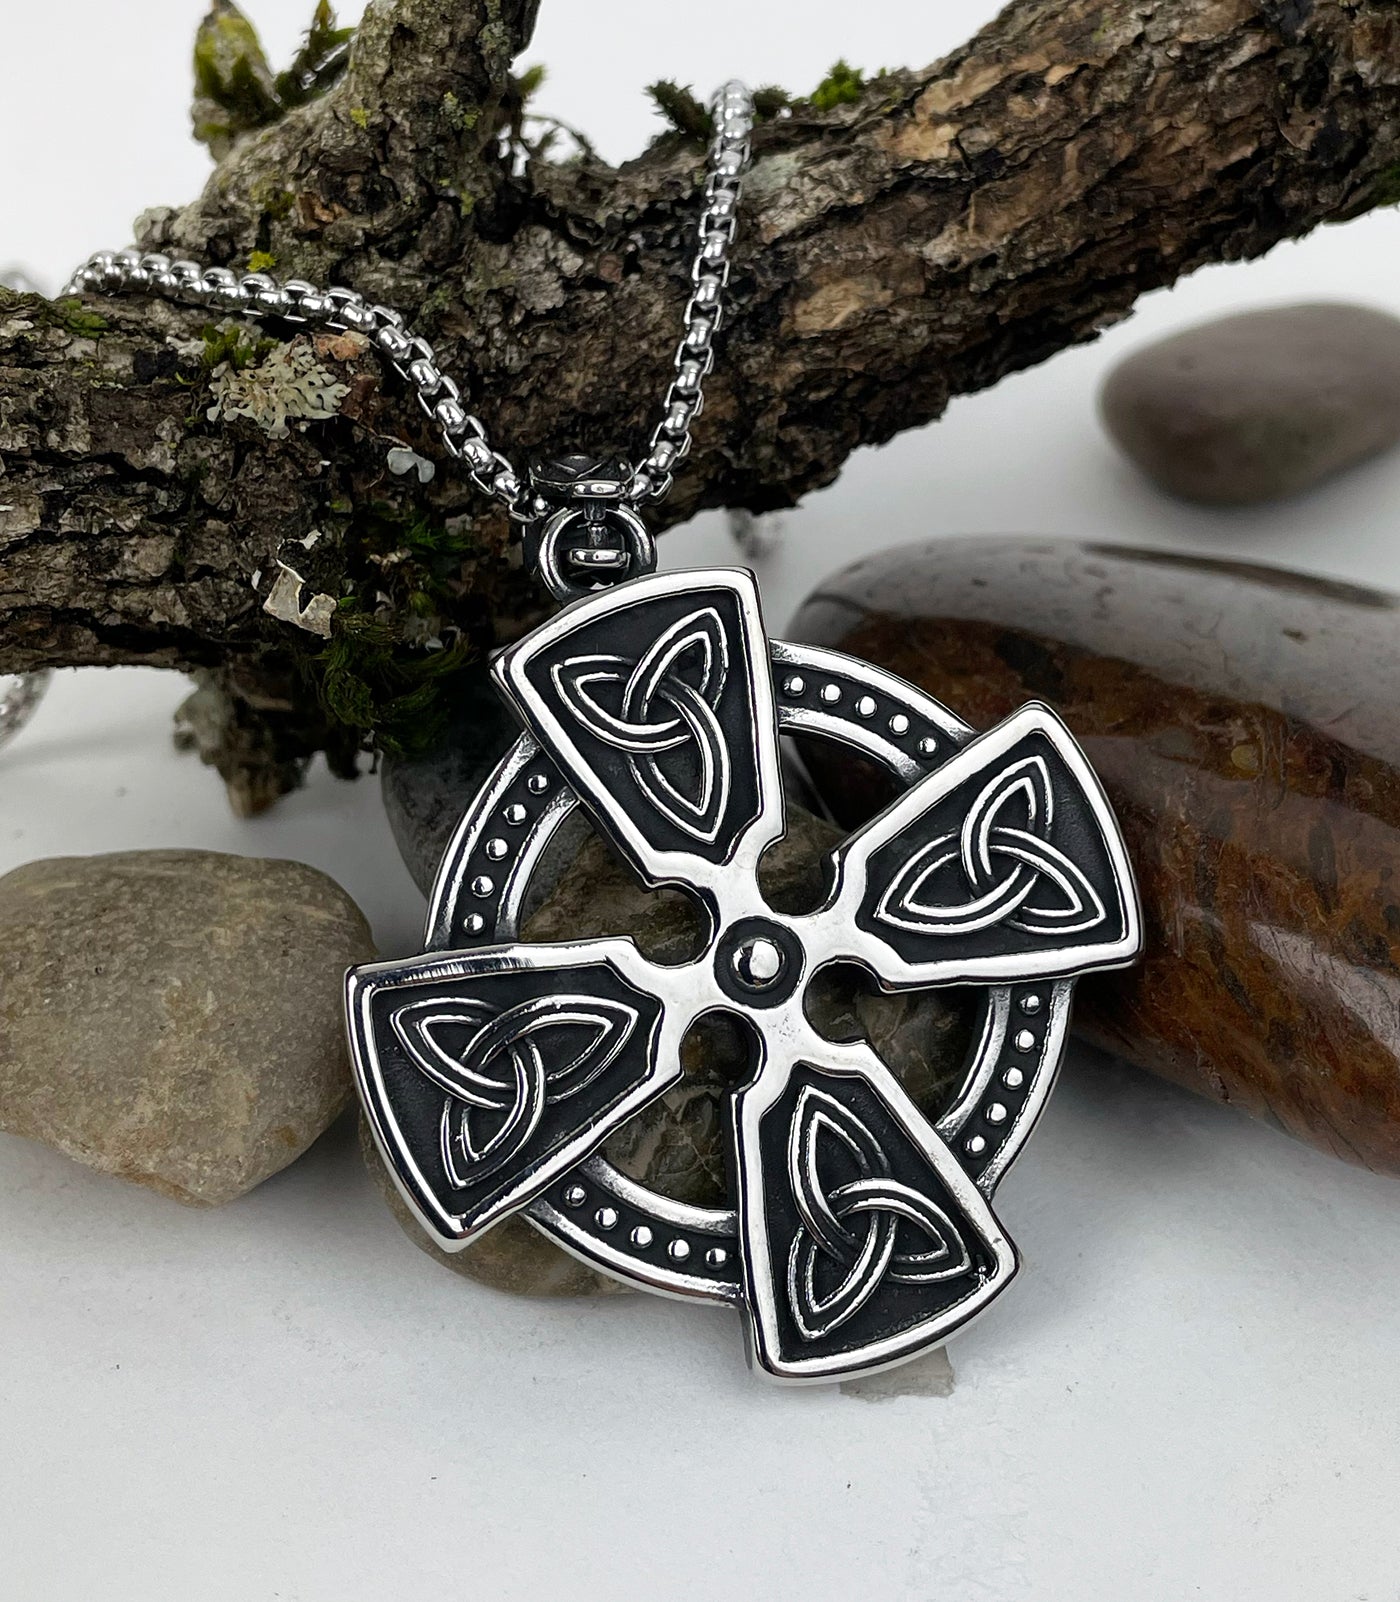 Square Celtic Cross with Trinity Knots Stainless Steel Pendant